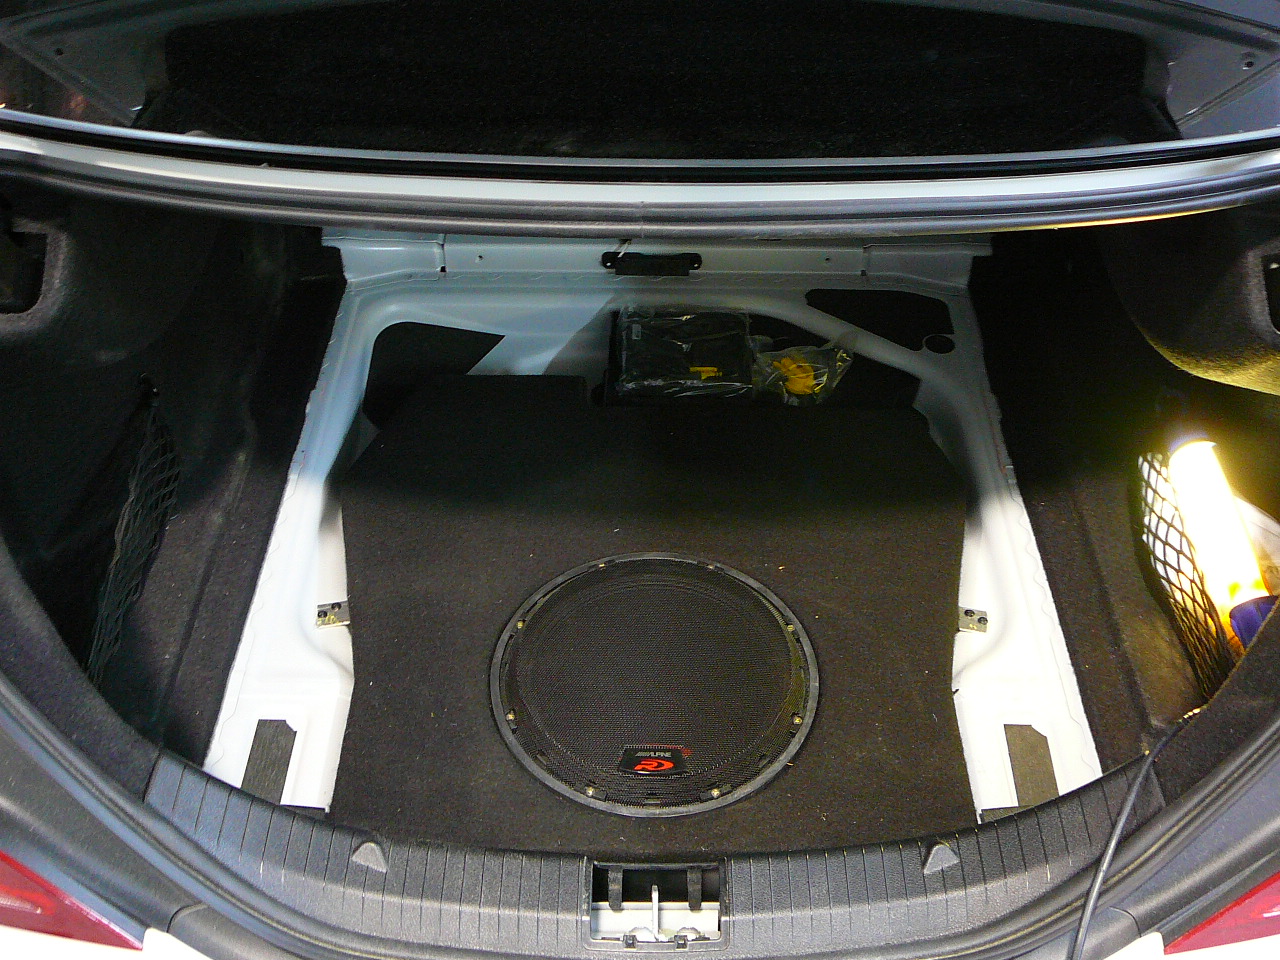 Mercedes Benz CLA45 AMG Alpine Type R Subwoofer with a Custom Boot Installation